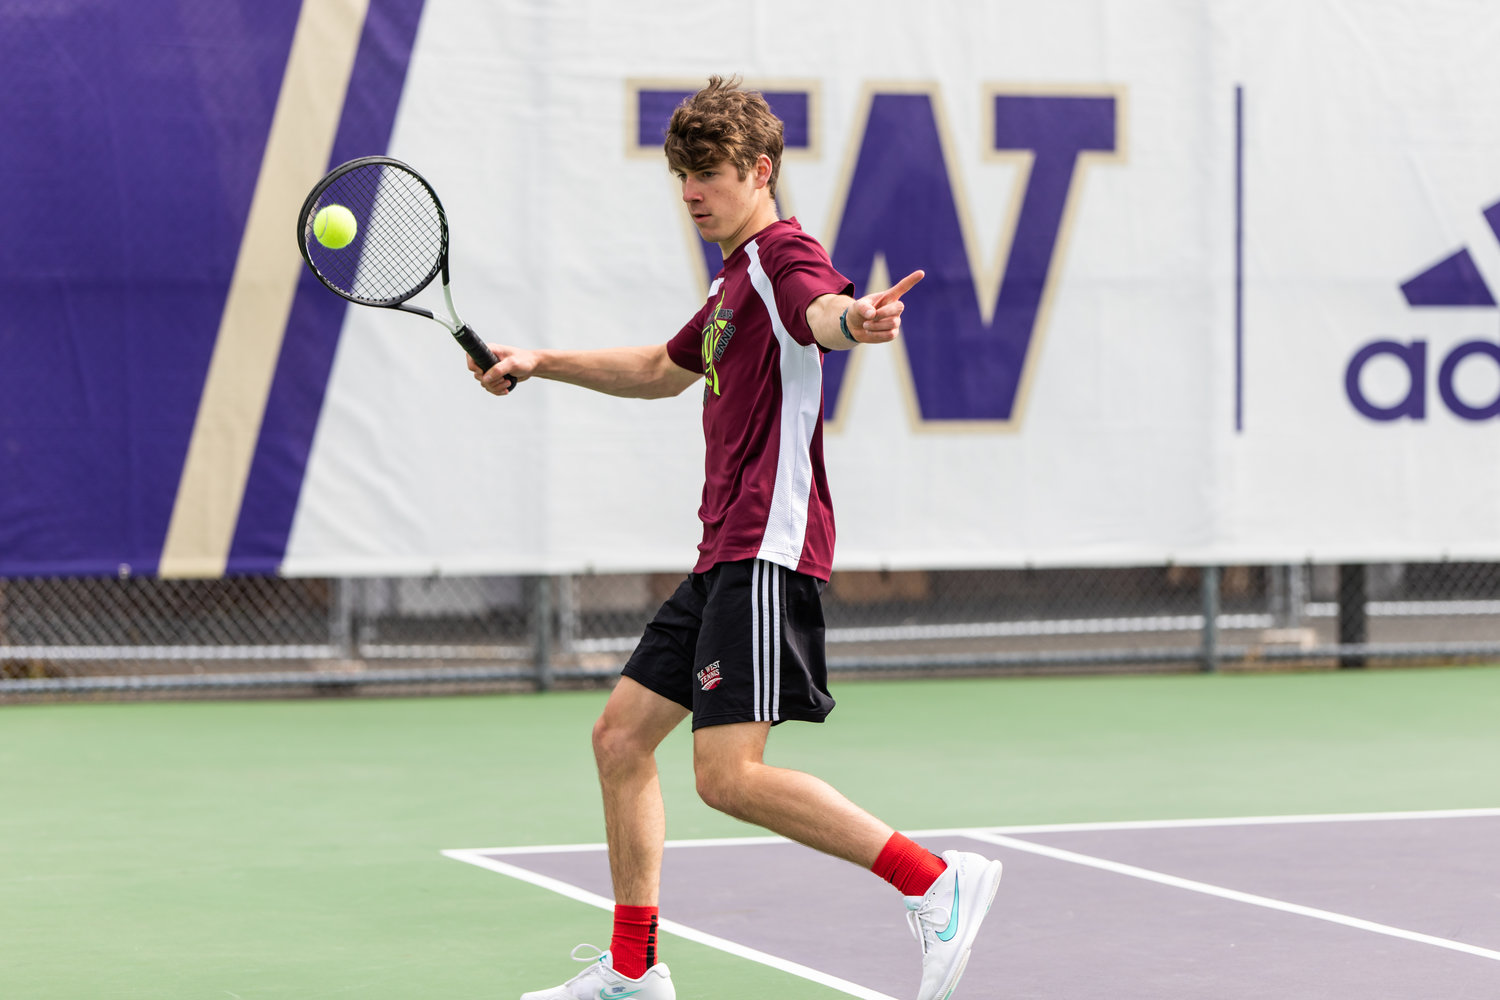 W.F. West's Aaron Boggess calls the ball out during the first set of the 2A boys' doubles tennis state competition on May 27, 2022.